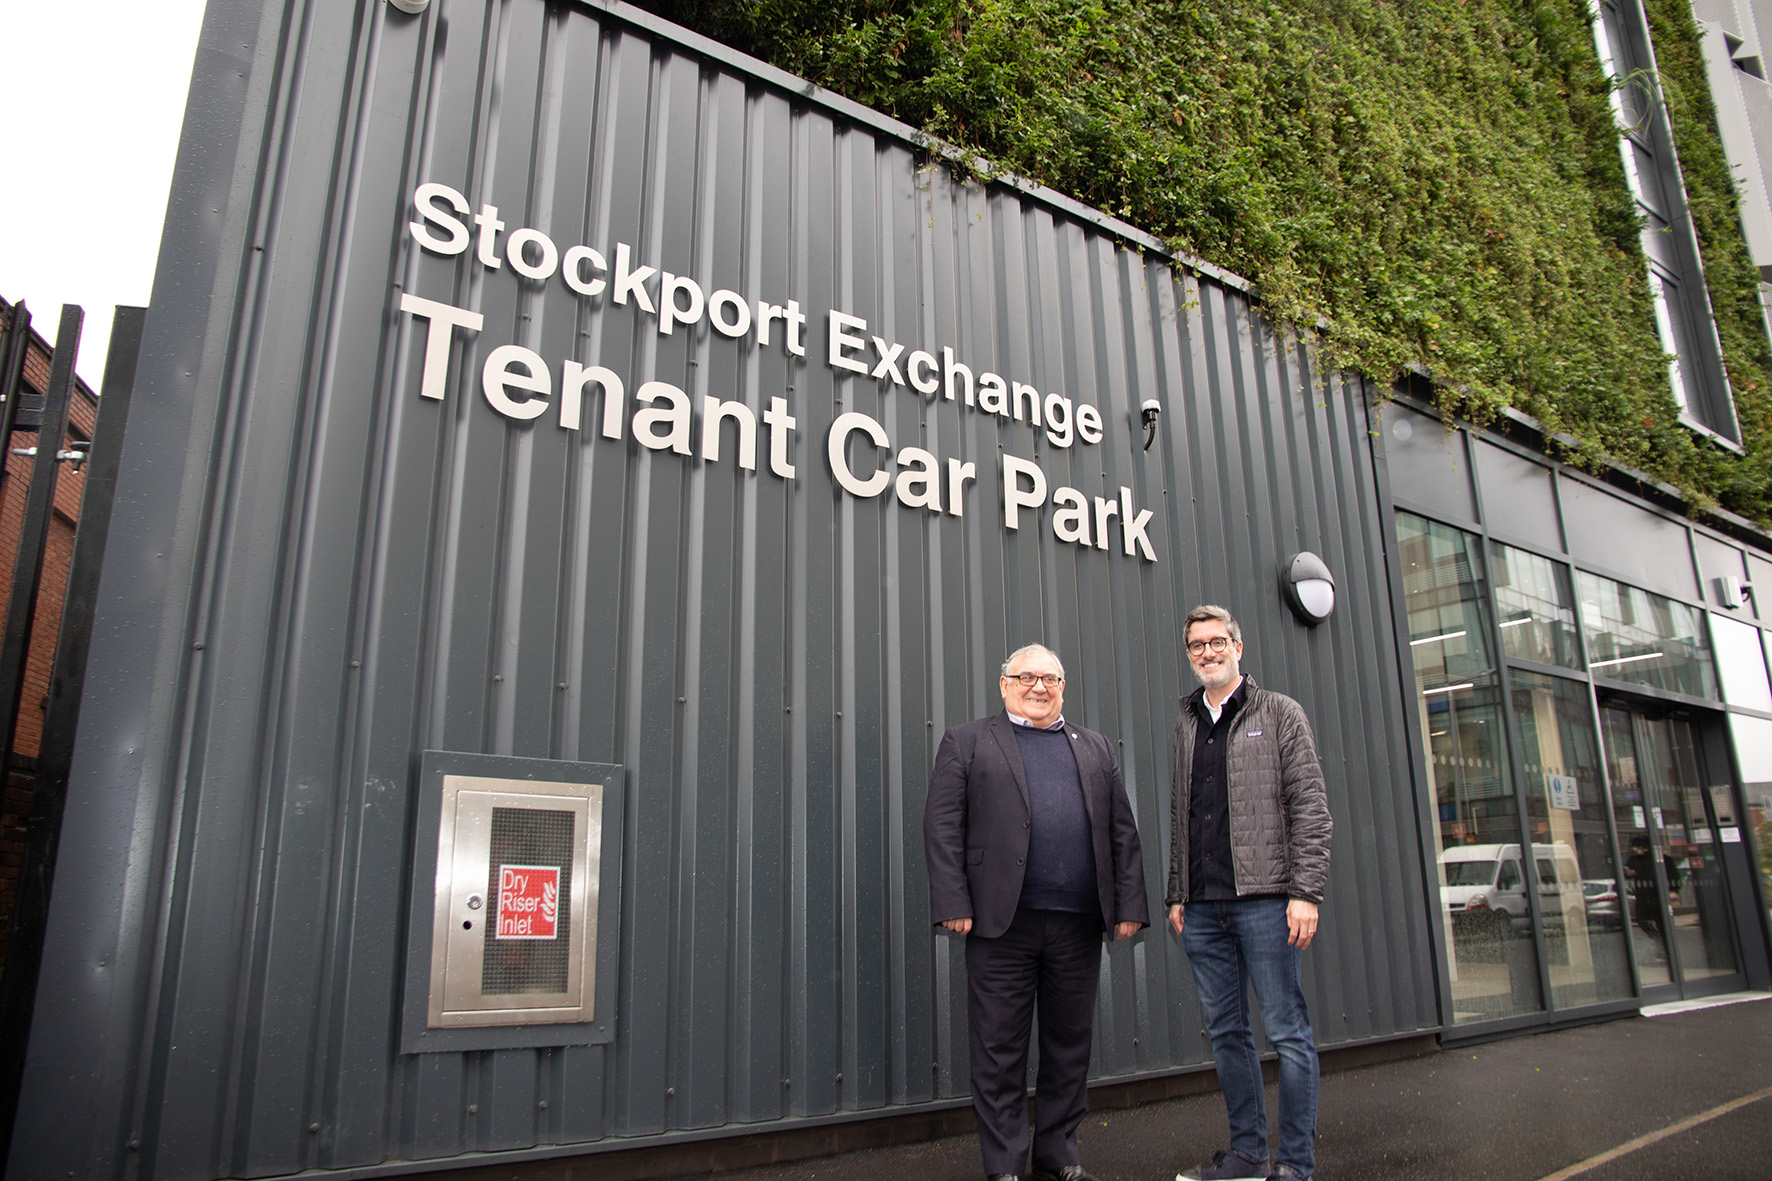 New tenant car park to support Stockport Council’s climate action ambition opens at Stockport Exchange  